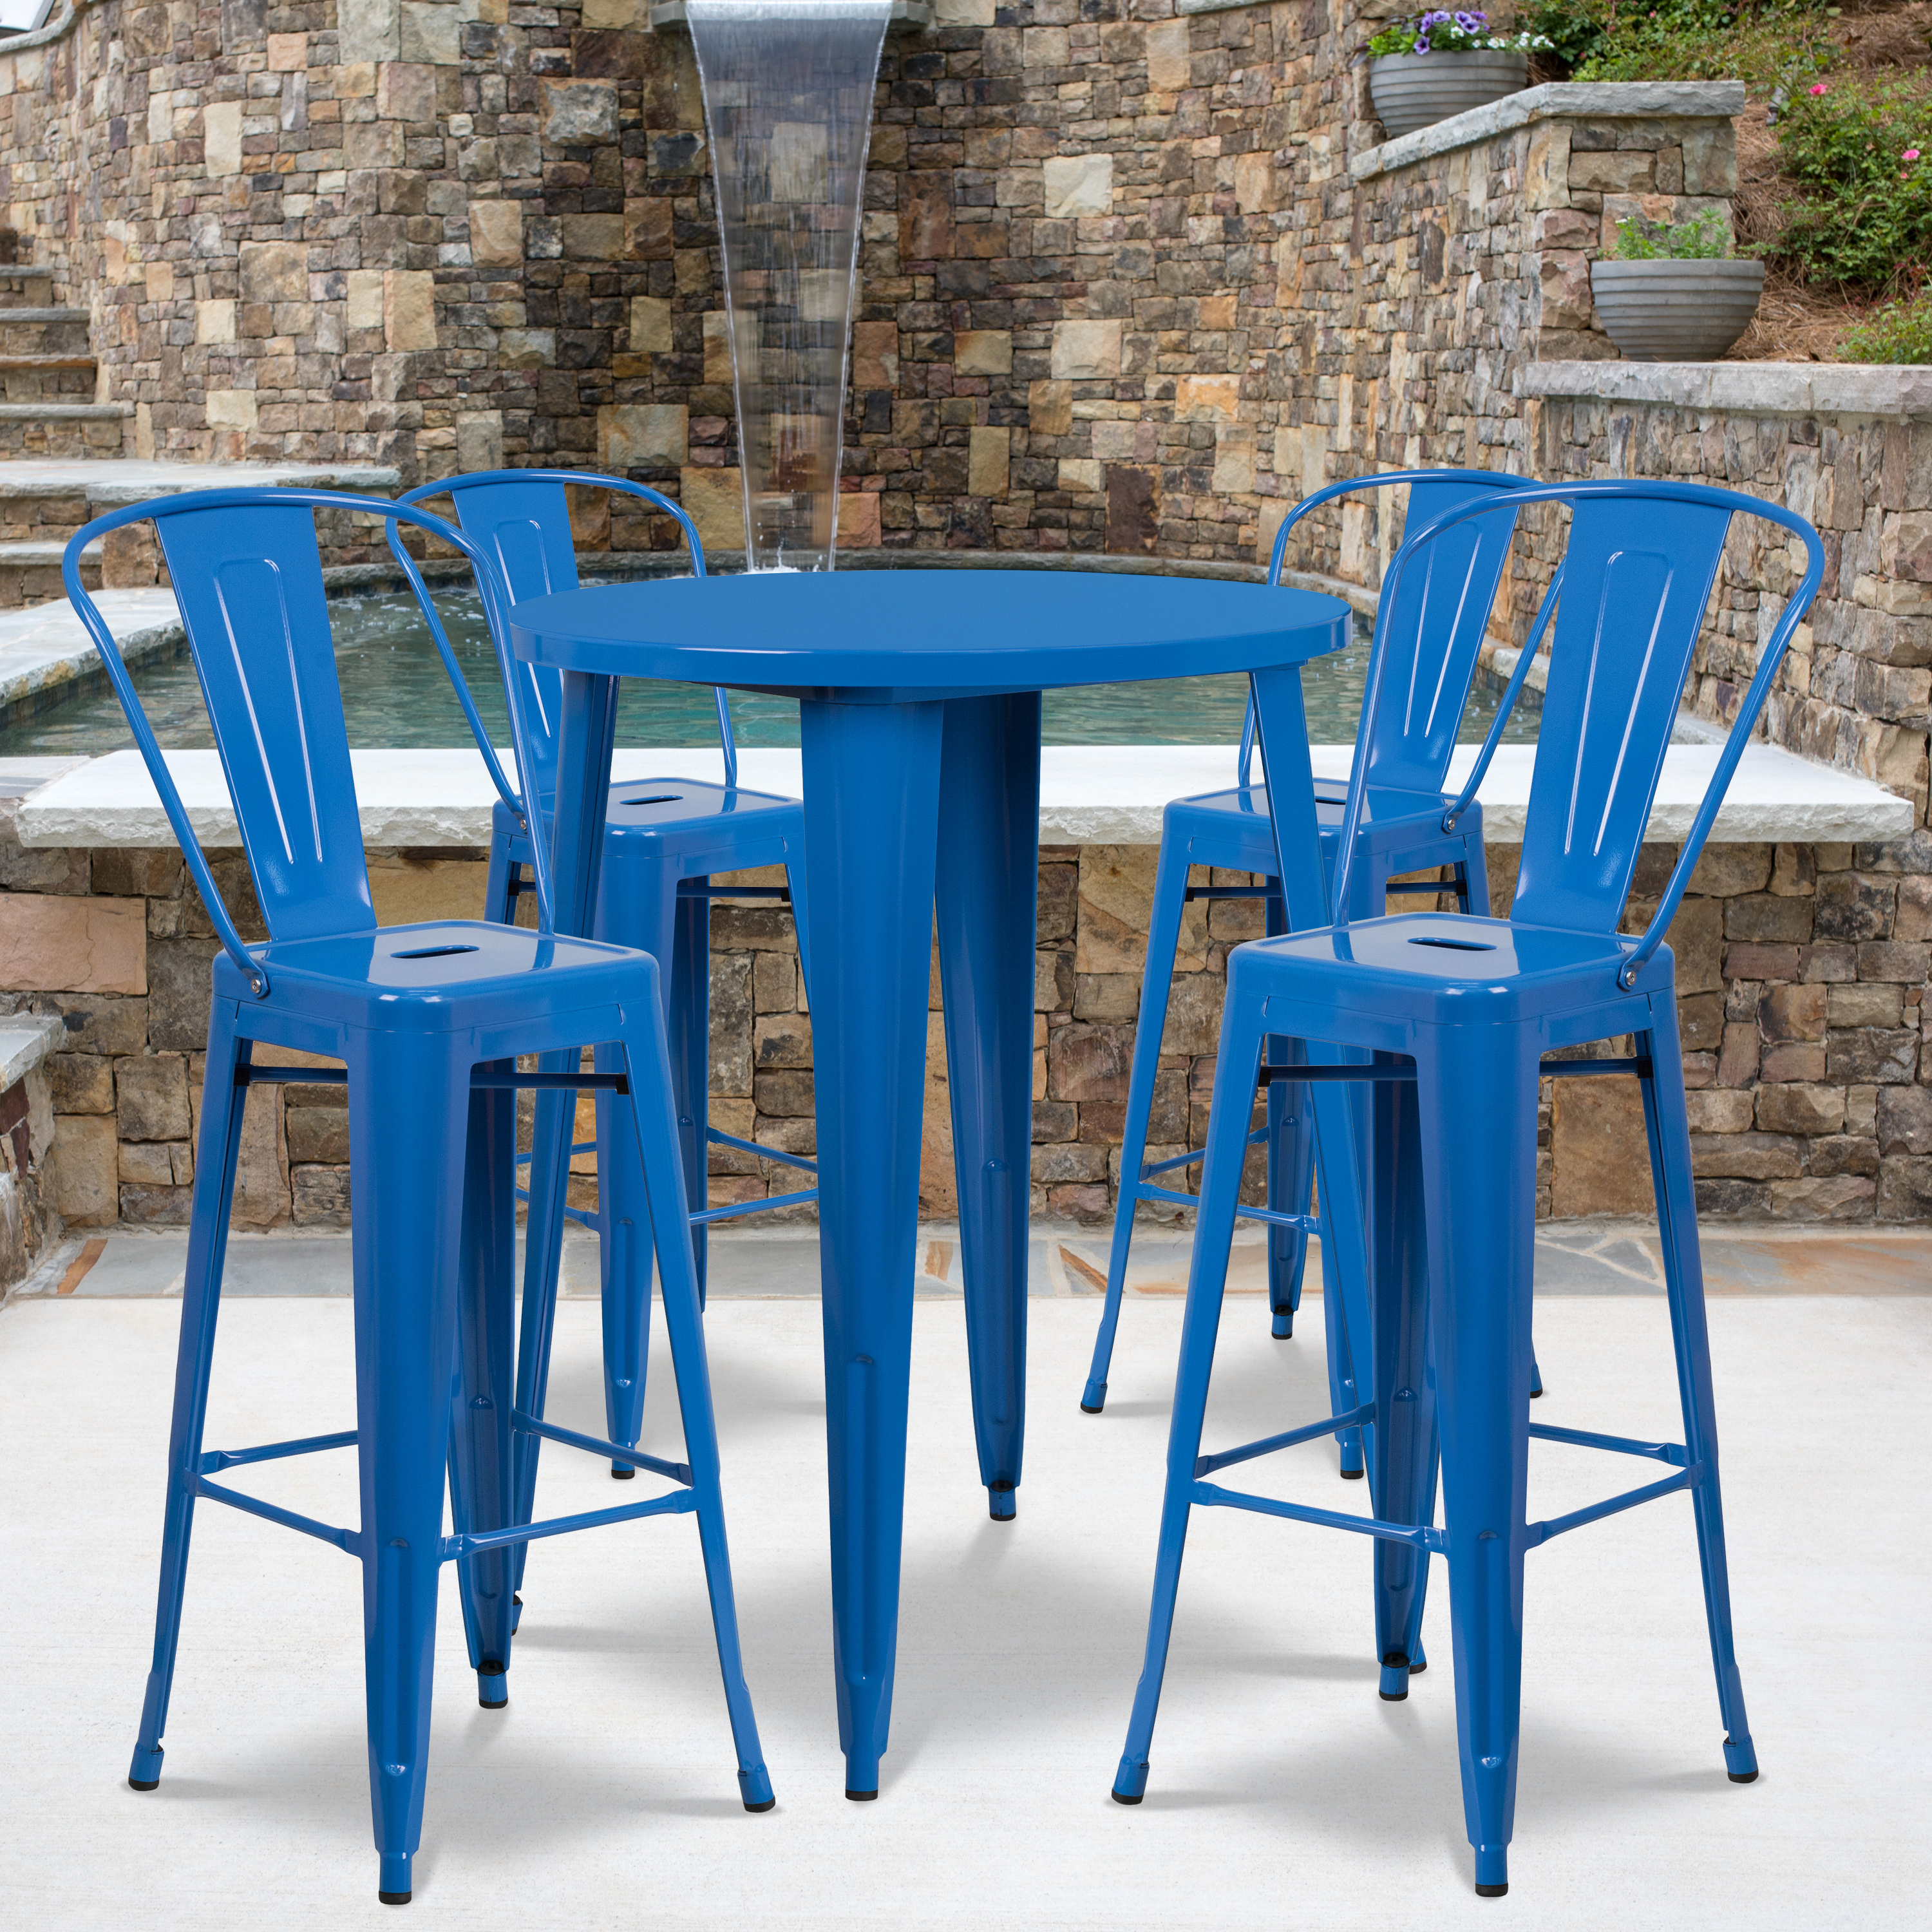 Flash Furniture Commercial Grade 30" Round Blue Metal Indoor-Outdoor Bar Table Set with 4 Cafe Stools - image 1 of 5